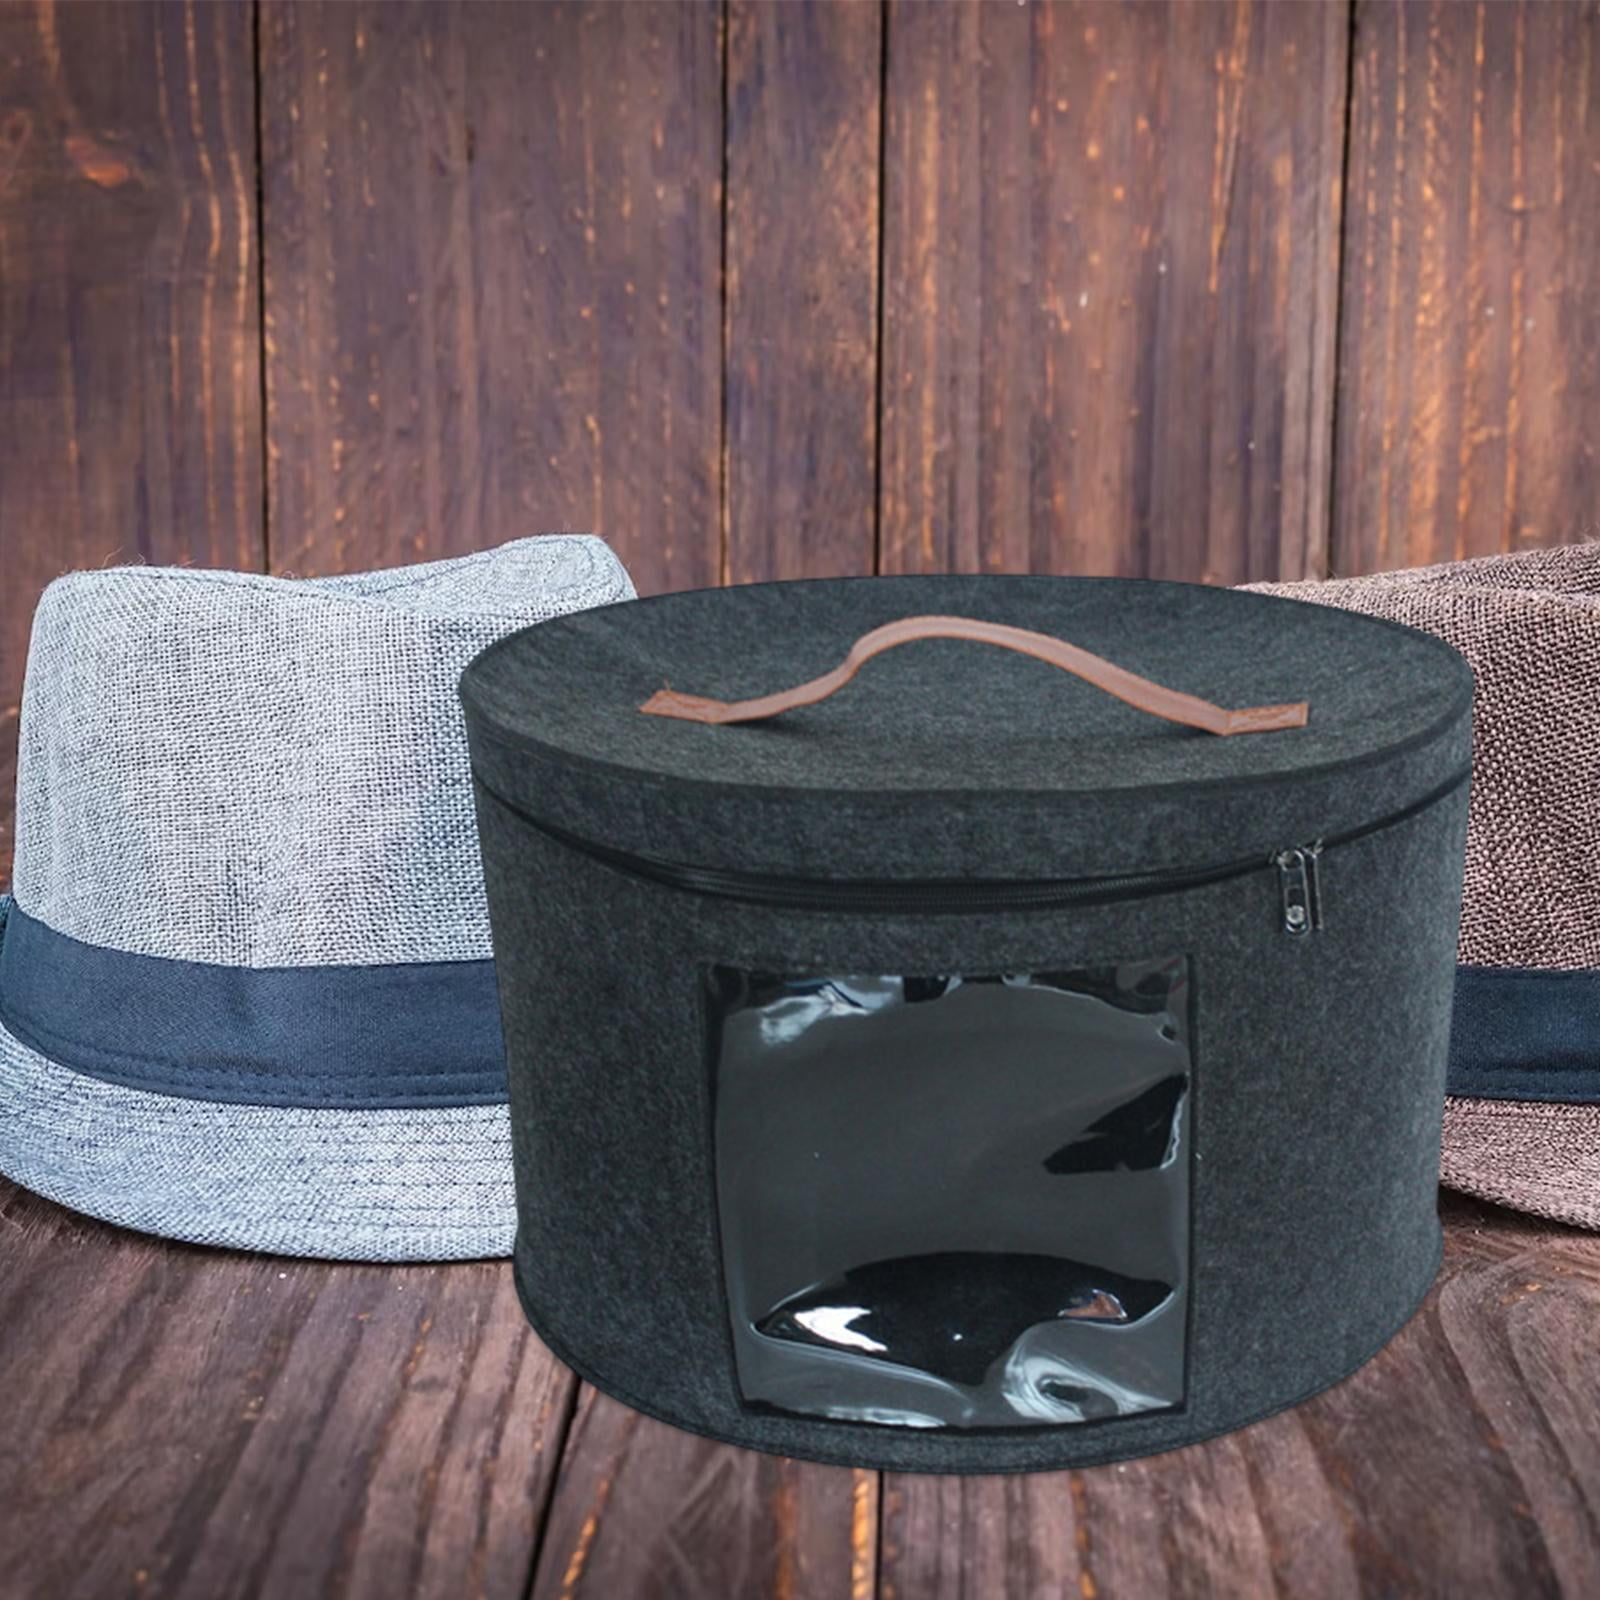 Ghtcv Hat Box 19'' Large Round Hat For Men and Women Foldable with Lid Stuffed Animal Toy Storage Box (Dark Gray)